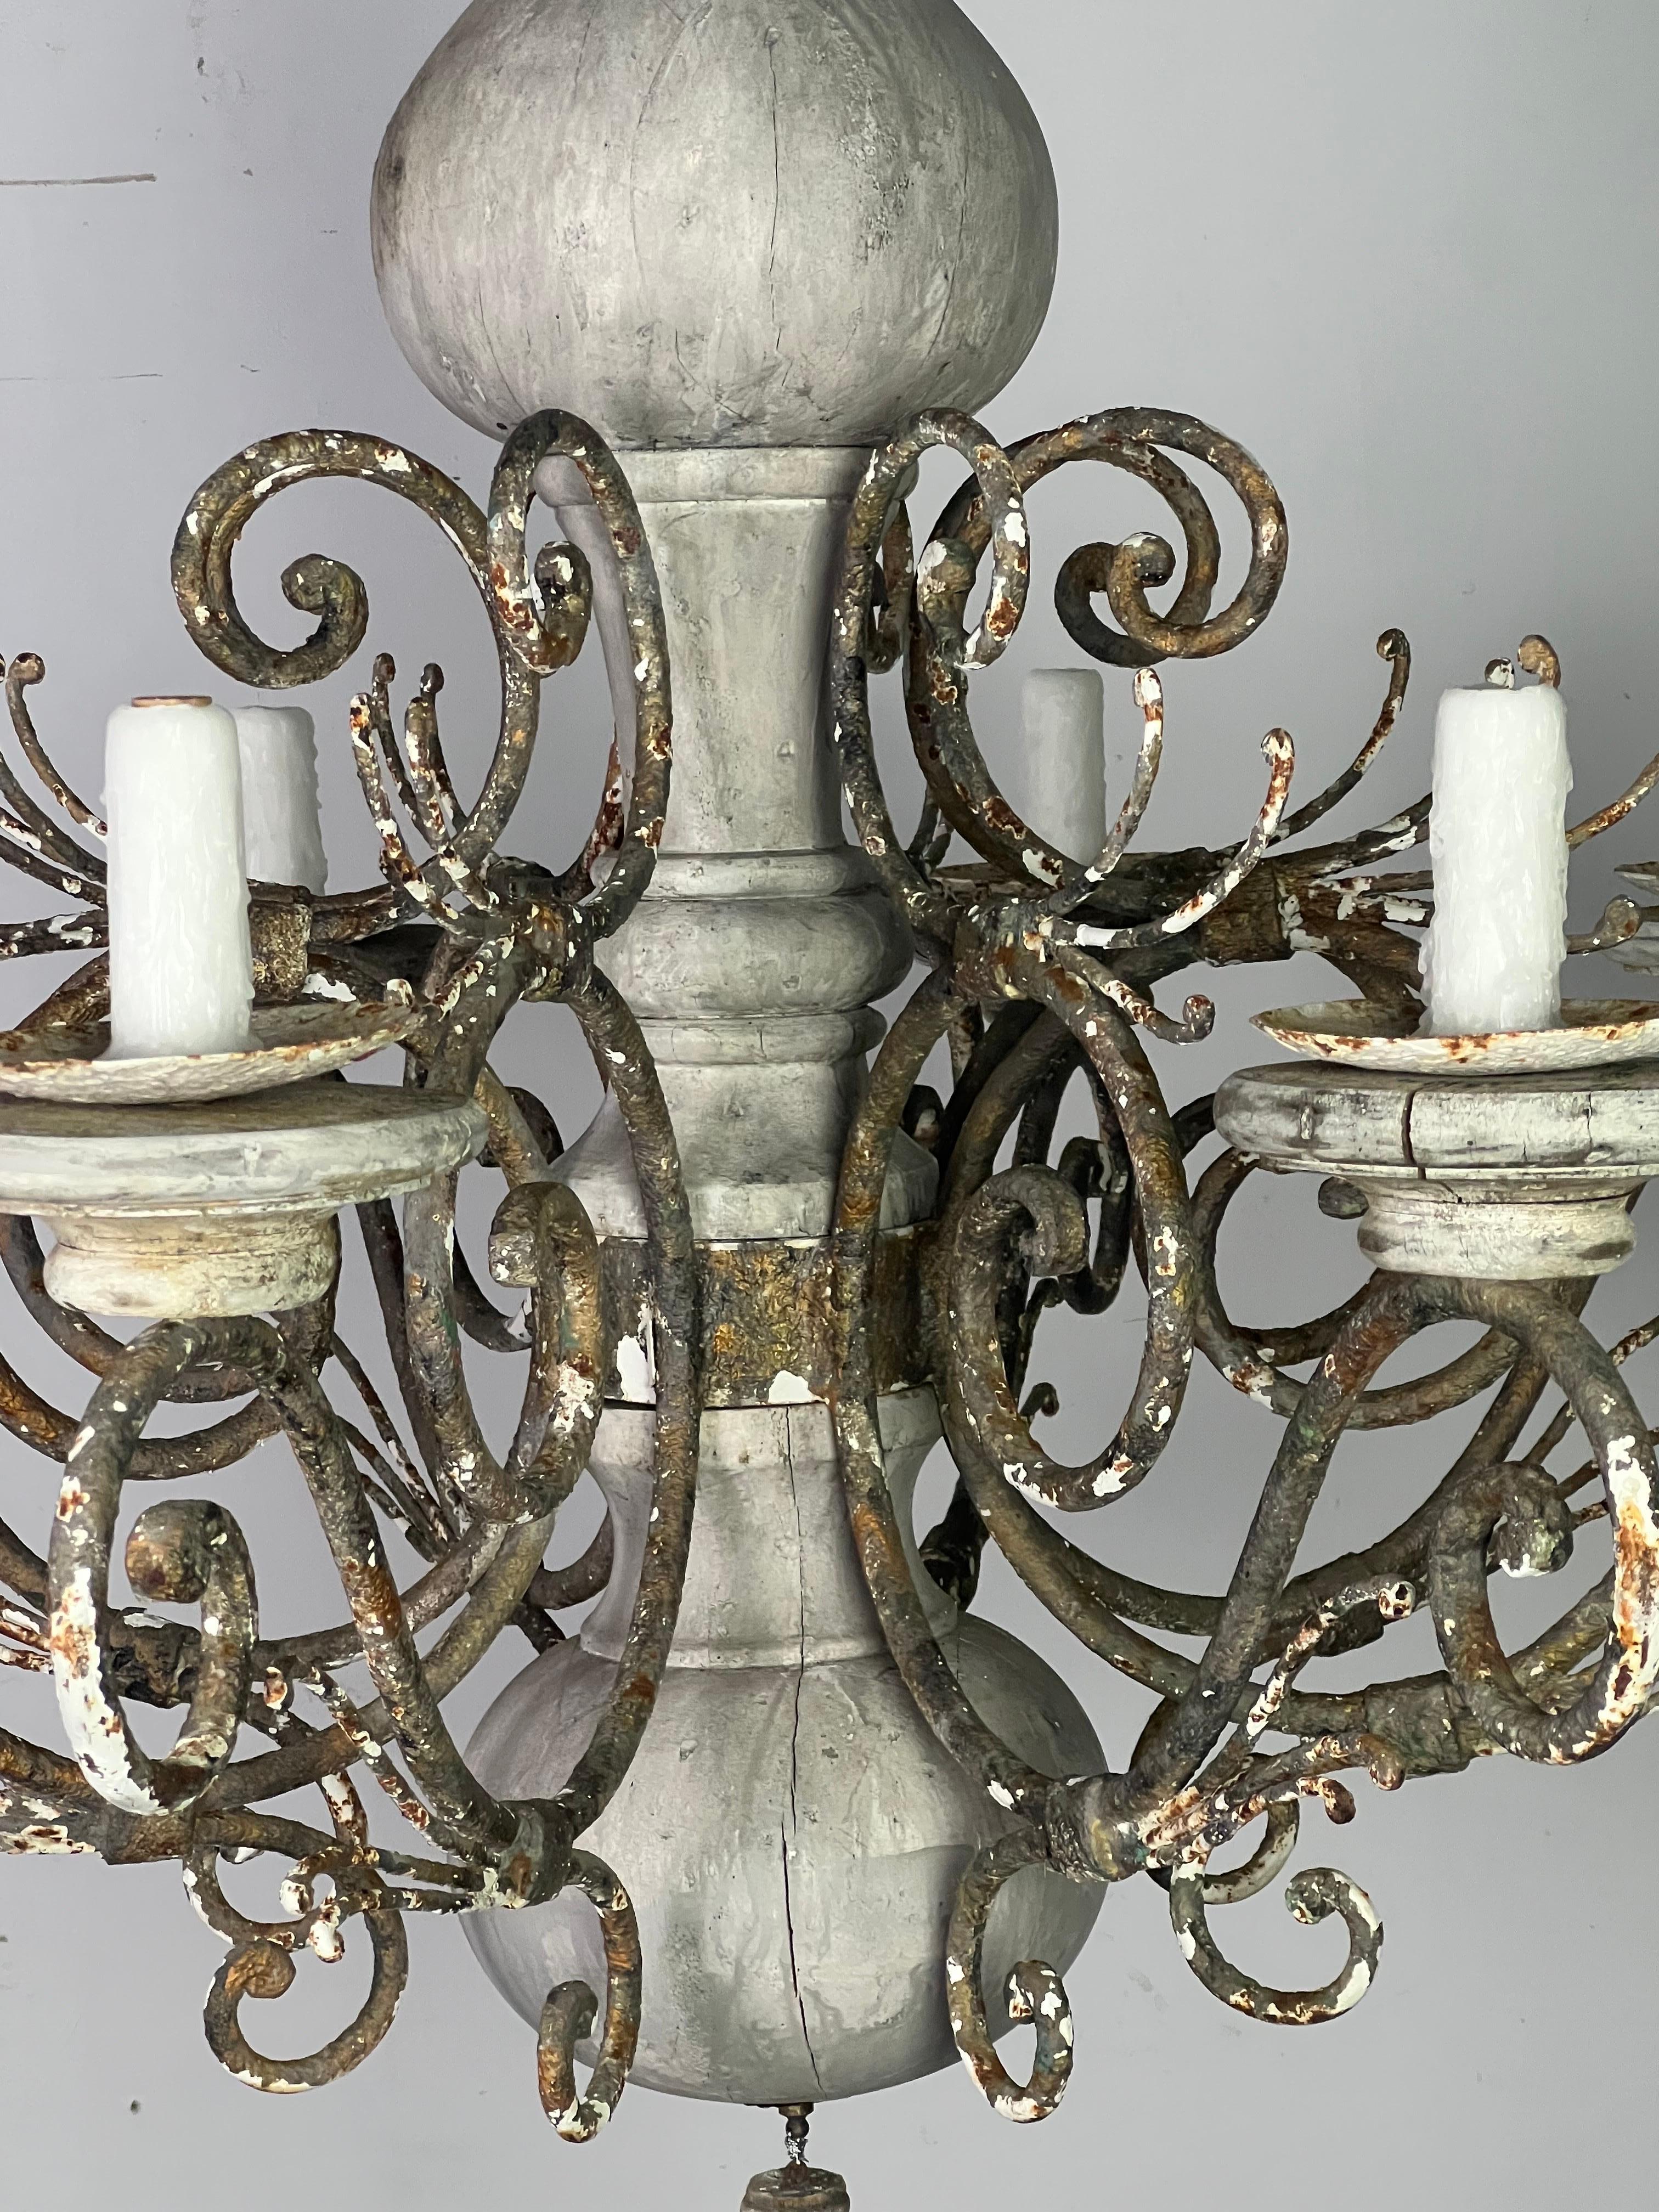 Monumental size eight light wood & iron chandelier. The chandelier is painted a dove gray coloration. The iron has developed a beautiful patina. The fixture is newly rewired and includes chain & canopy.